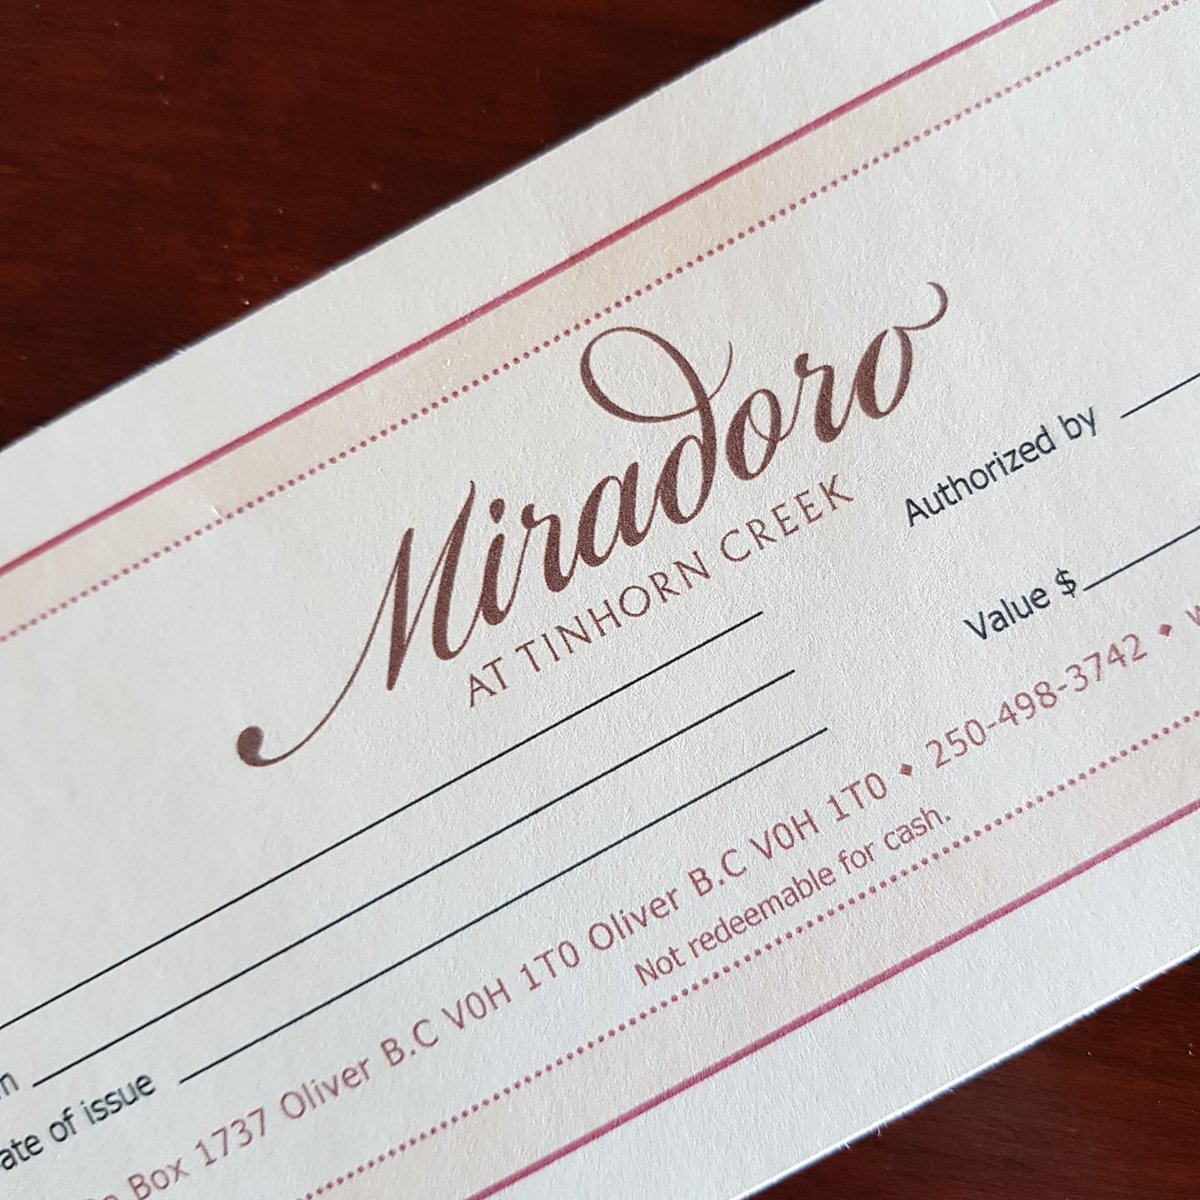 Stuck for a #deliciousgiftidea? Miradoro Gift Certificates are the answer. Available in any amount and no expiry date. Call or email for details 250-498-3742 info@miradoro.ca #supportlocalokanagan #awardwinning #wineandfood #eatdrinklocal #MiradoroEats #winerydining